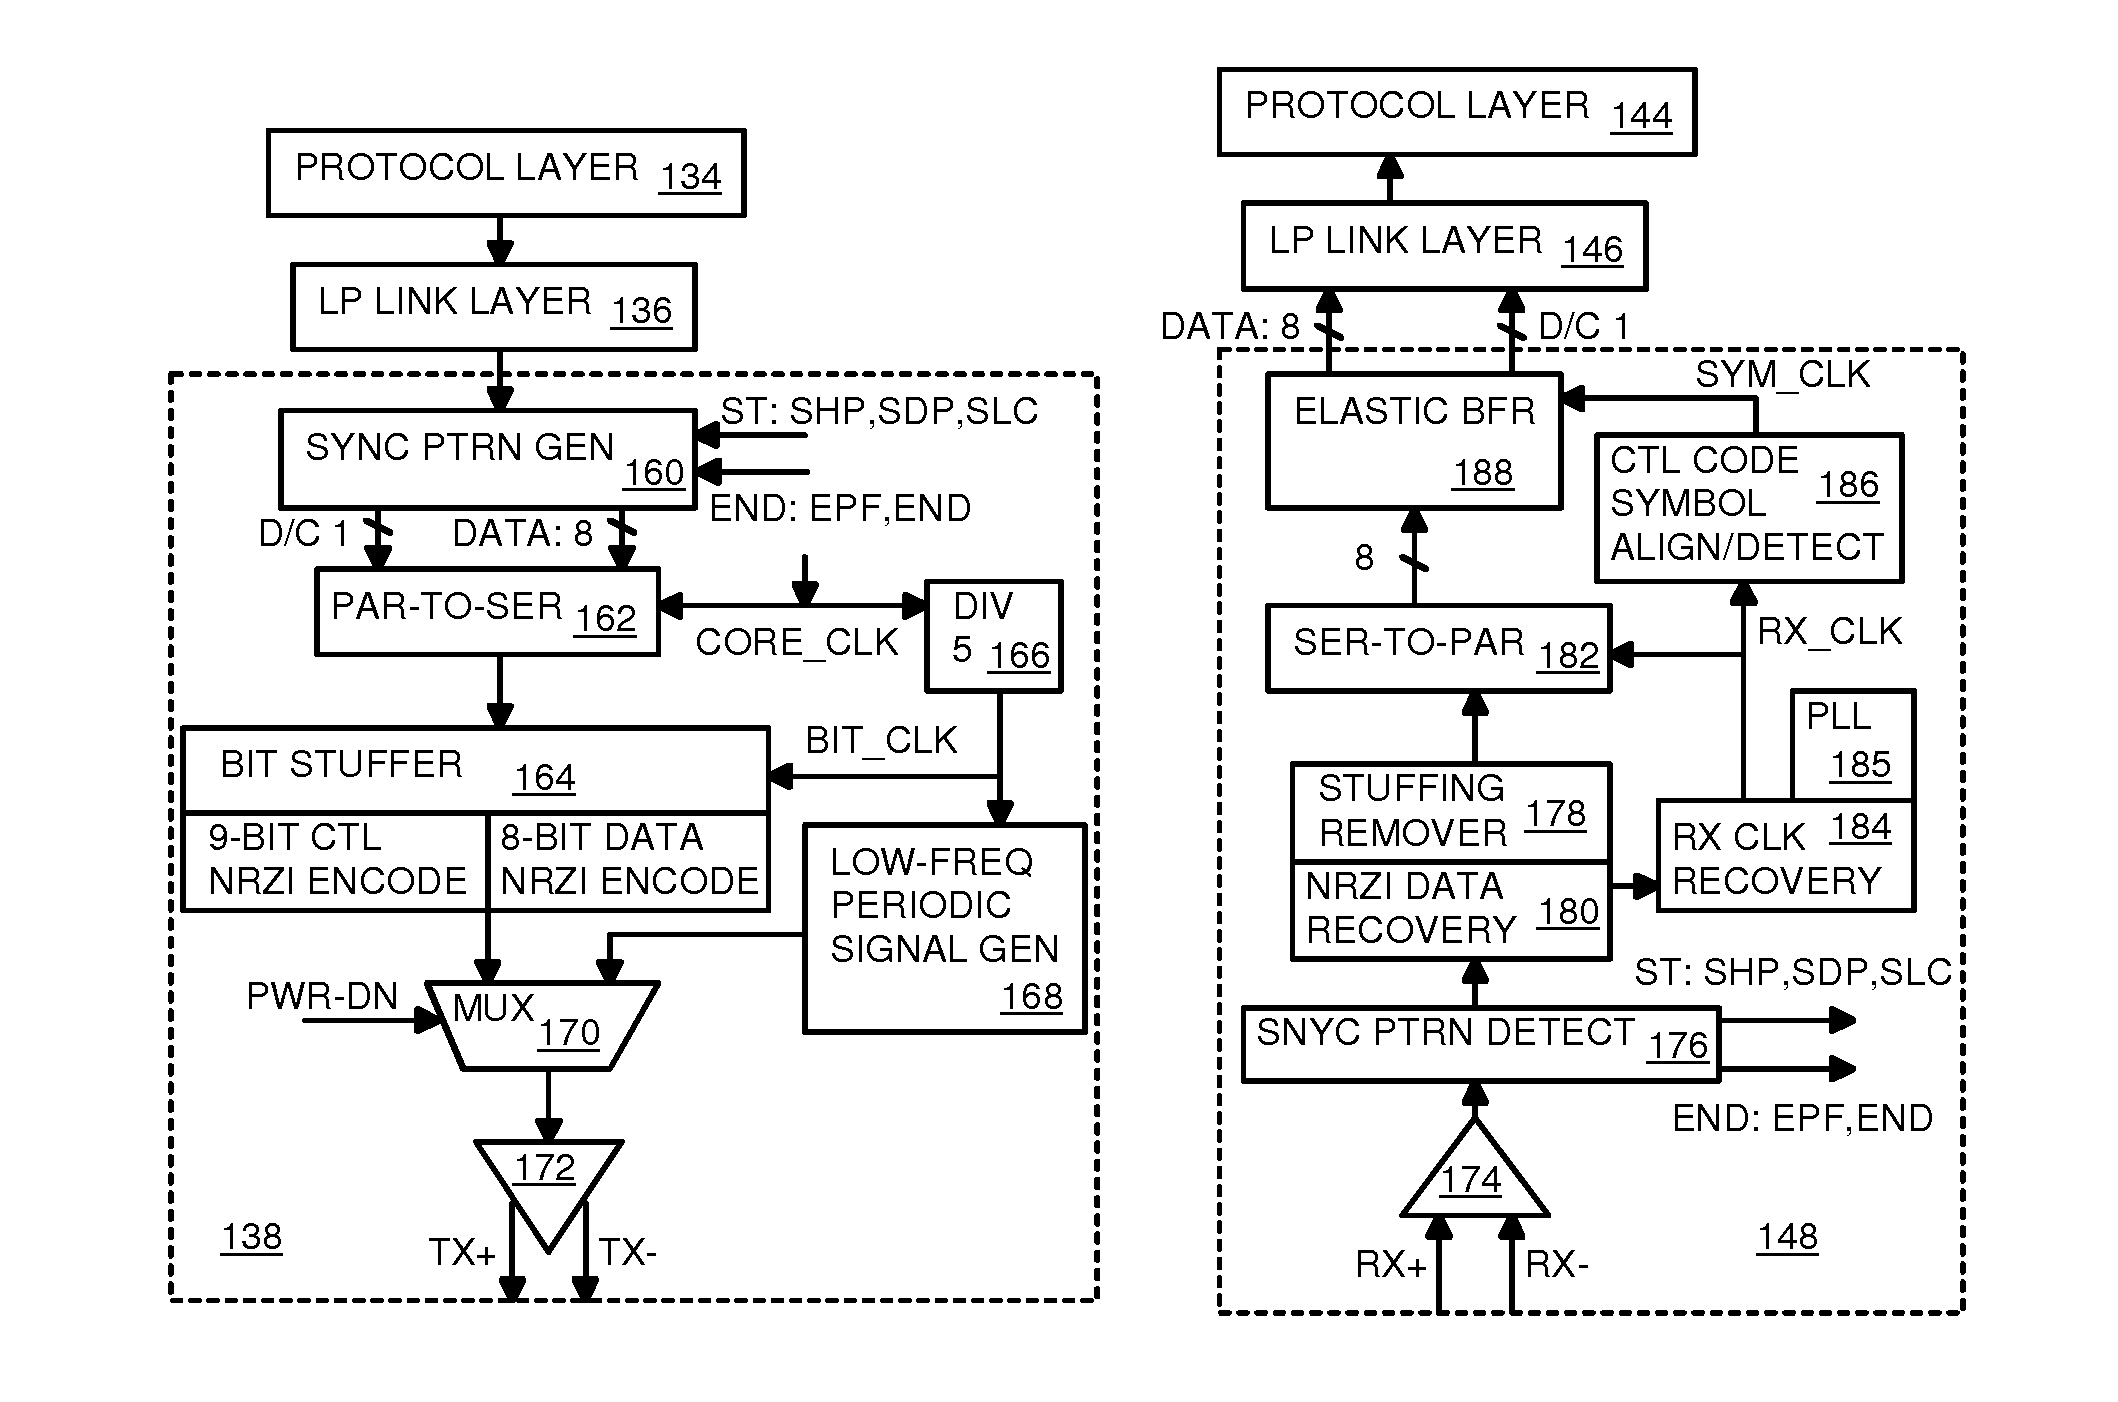 Low-power USB superspeed device with 8-bit payload and 9-bit frame NRZI encoding for replacing 8/10-bit encoding